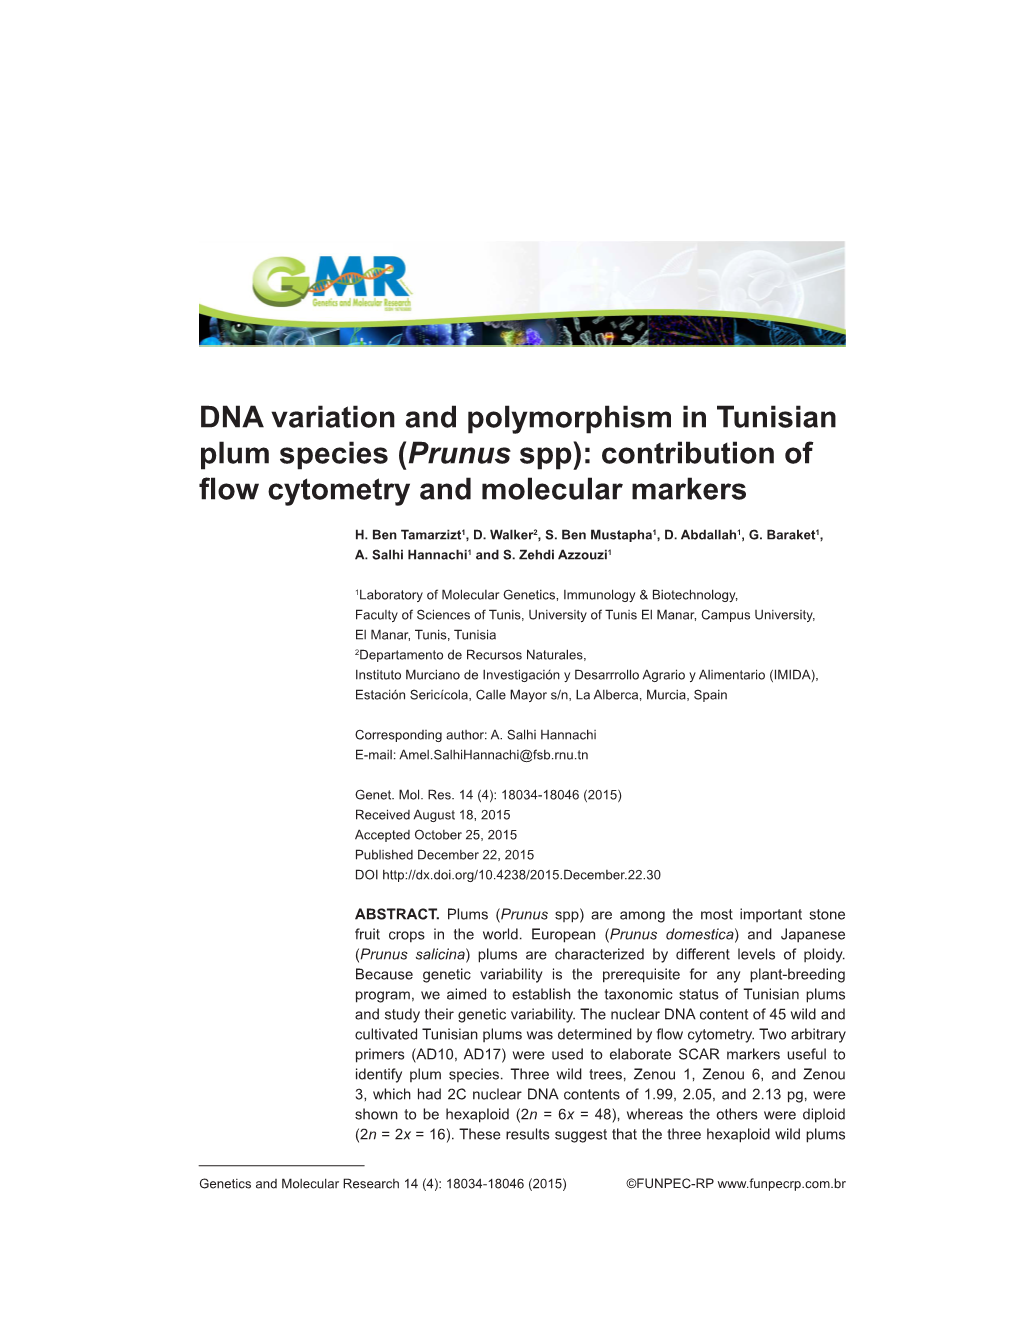 DNA Variation and Polymorphism in Tunisian Plum Species (Prunus Spp): Contribution of Flow Cytometry and Molecular Markers